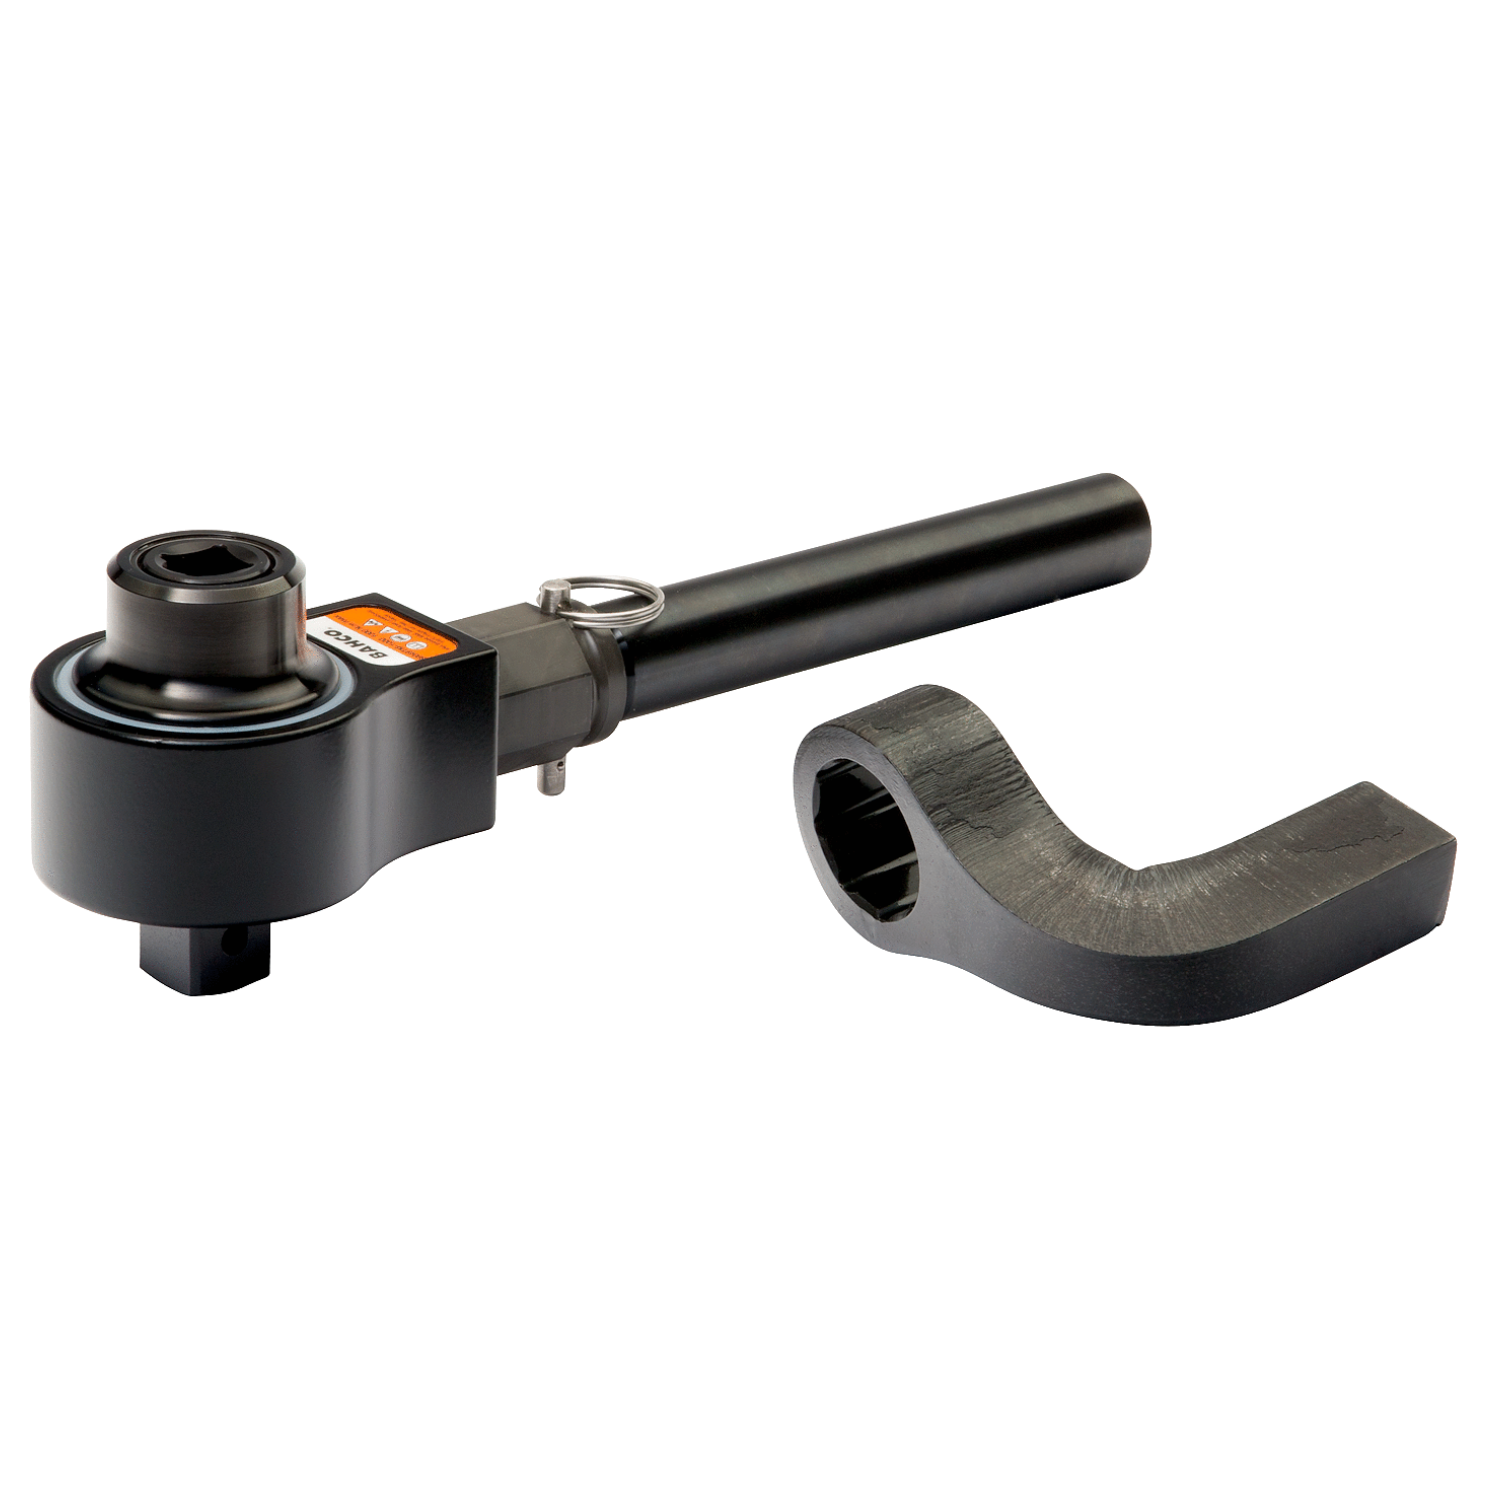 BAHCO 89049TM 1000 Hand Torque Multiplier with Offset and Arms - Premium Torque Multiplier from BAHCO - Shop now at Yew Aik.